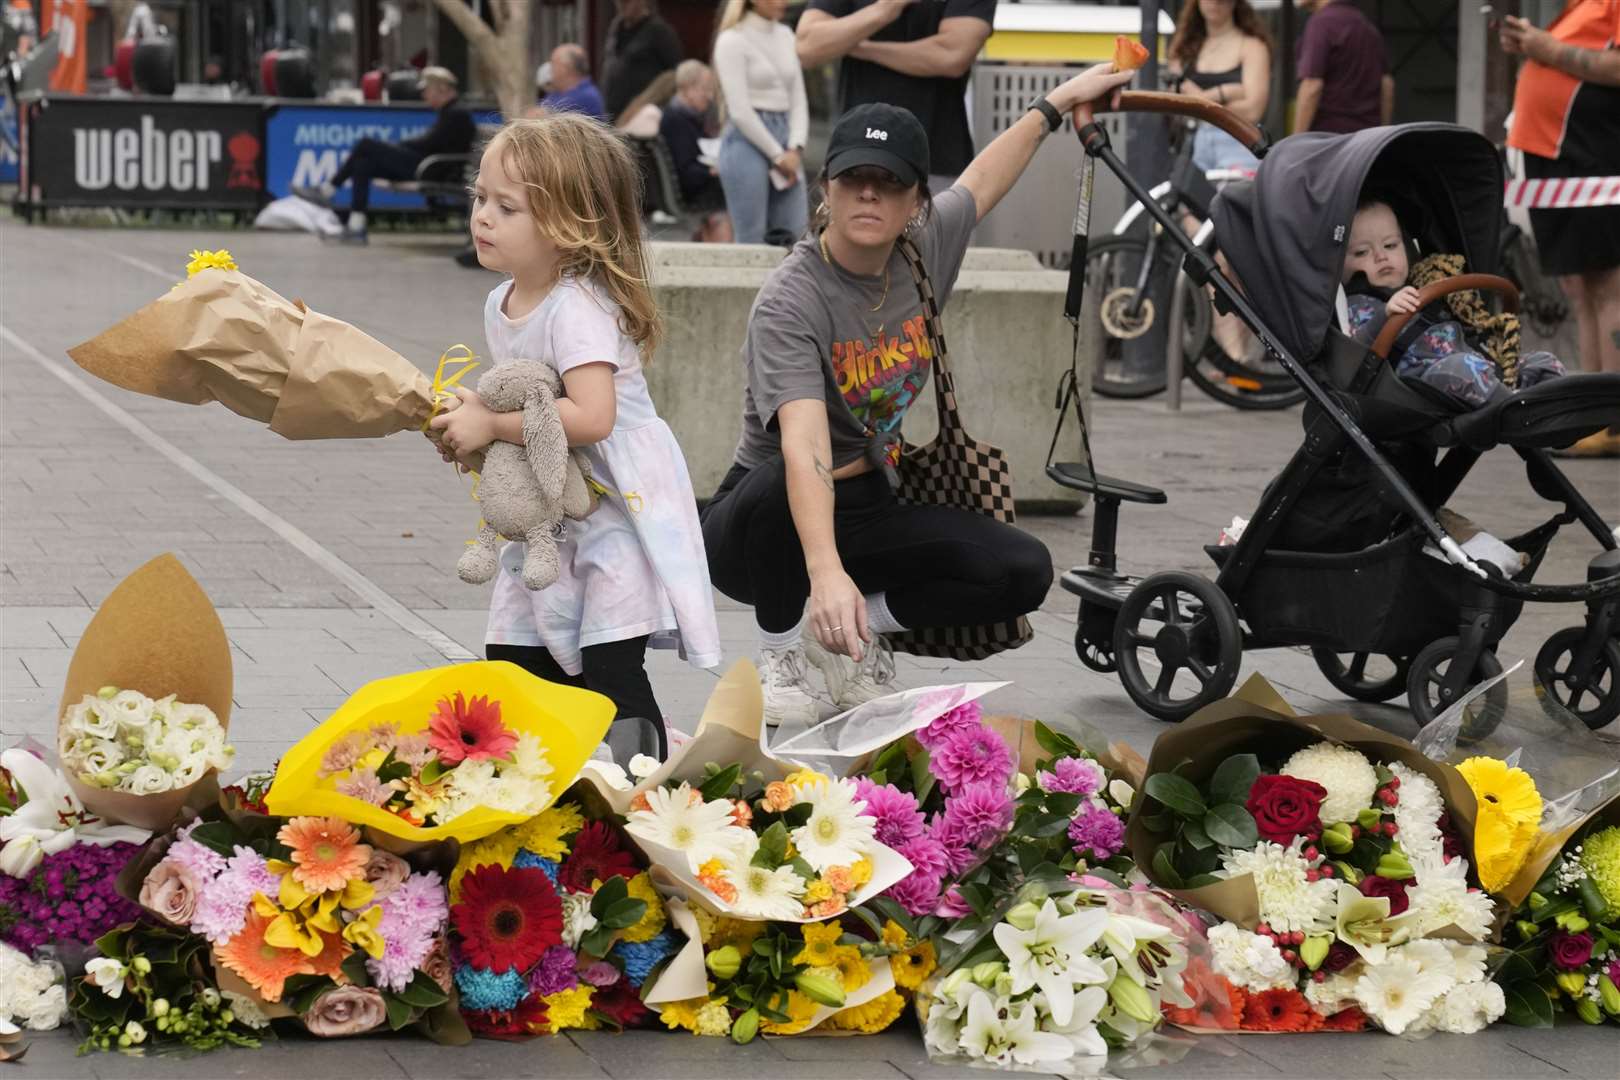 A young child carries flowers to place as a tribute near the crime scene at Bondi Junction (Rick Rycroft/AP)